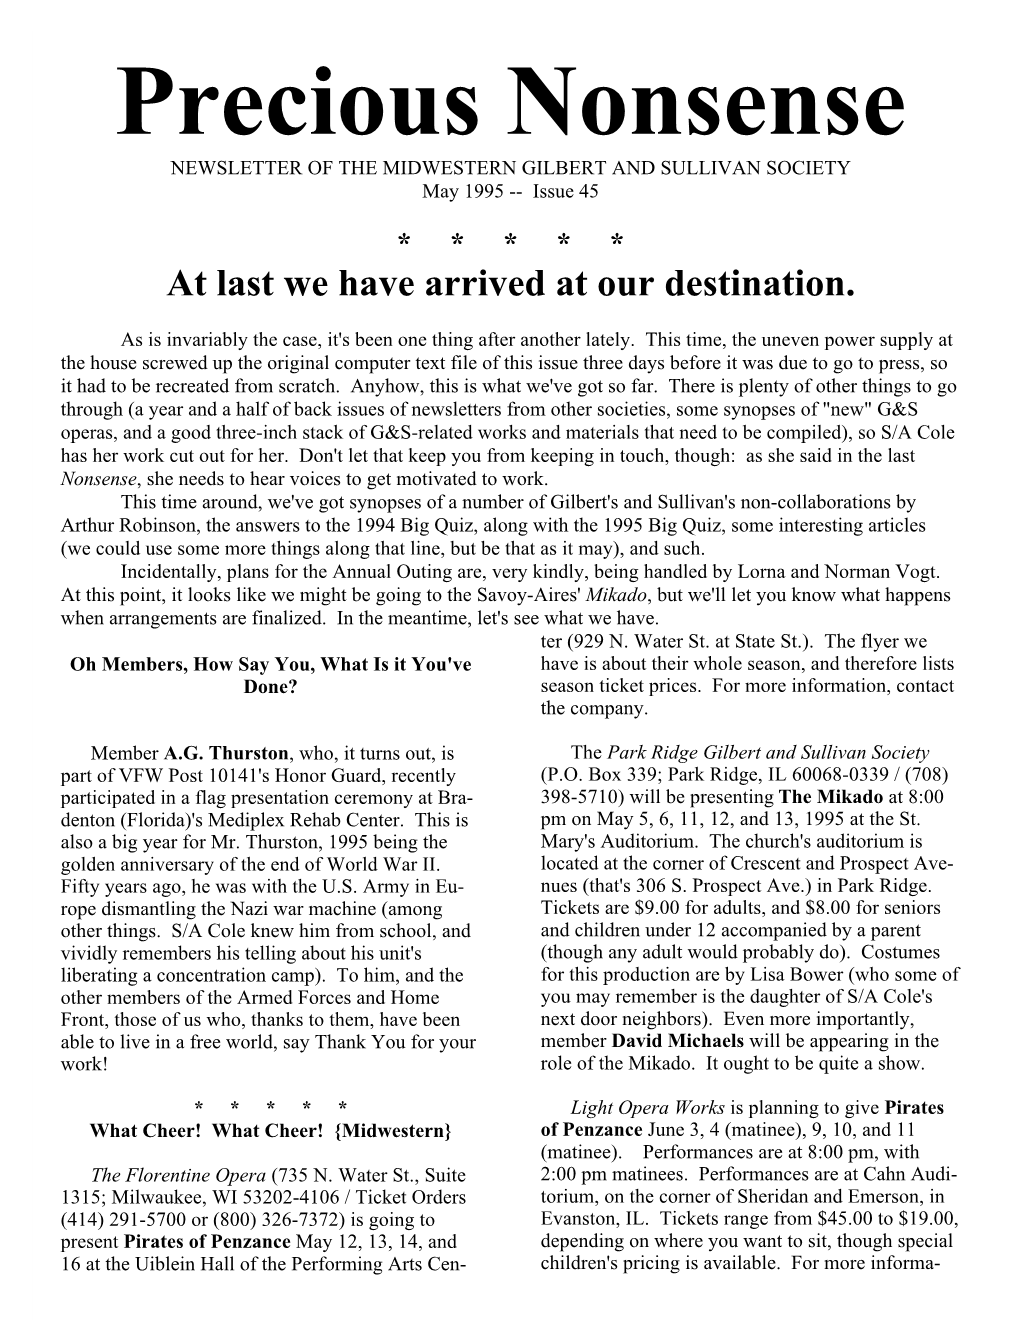 Precious Nonsense NEWSLETTER of the MIDWESTERN GILBERT and SULLIVAN SOCIETY May 1995 -- Issue 45 * * * * * at Last We Have Arrived at Our Destination